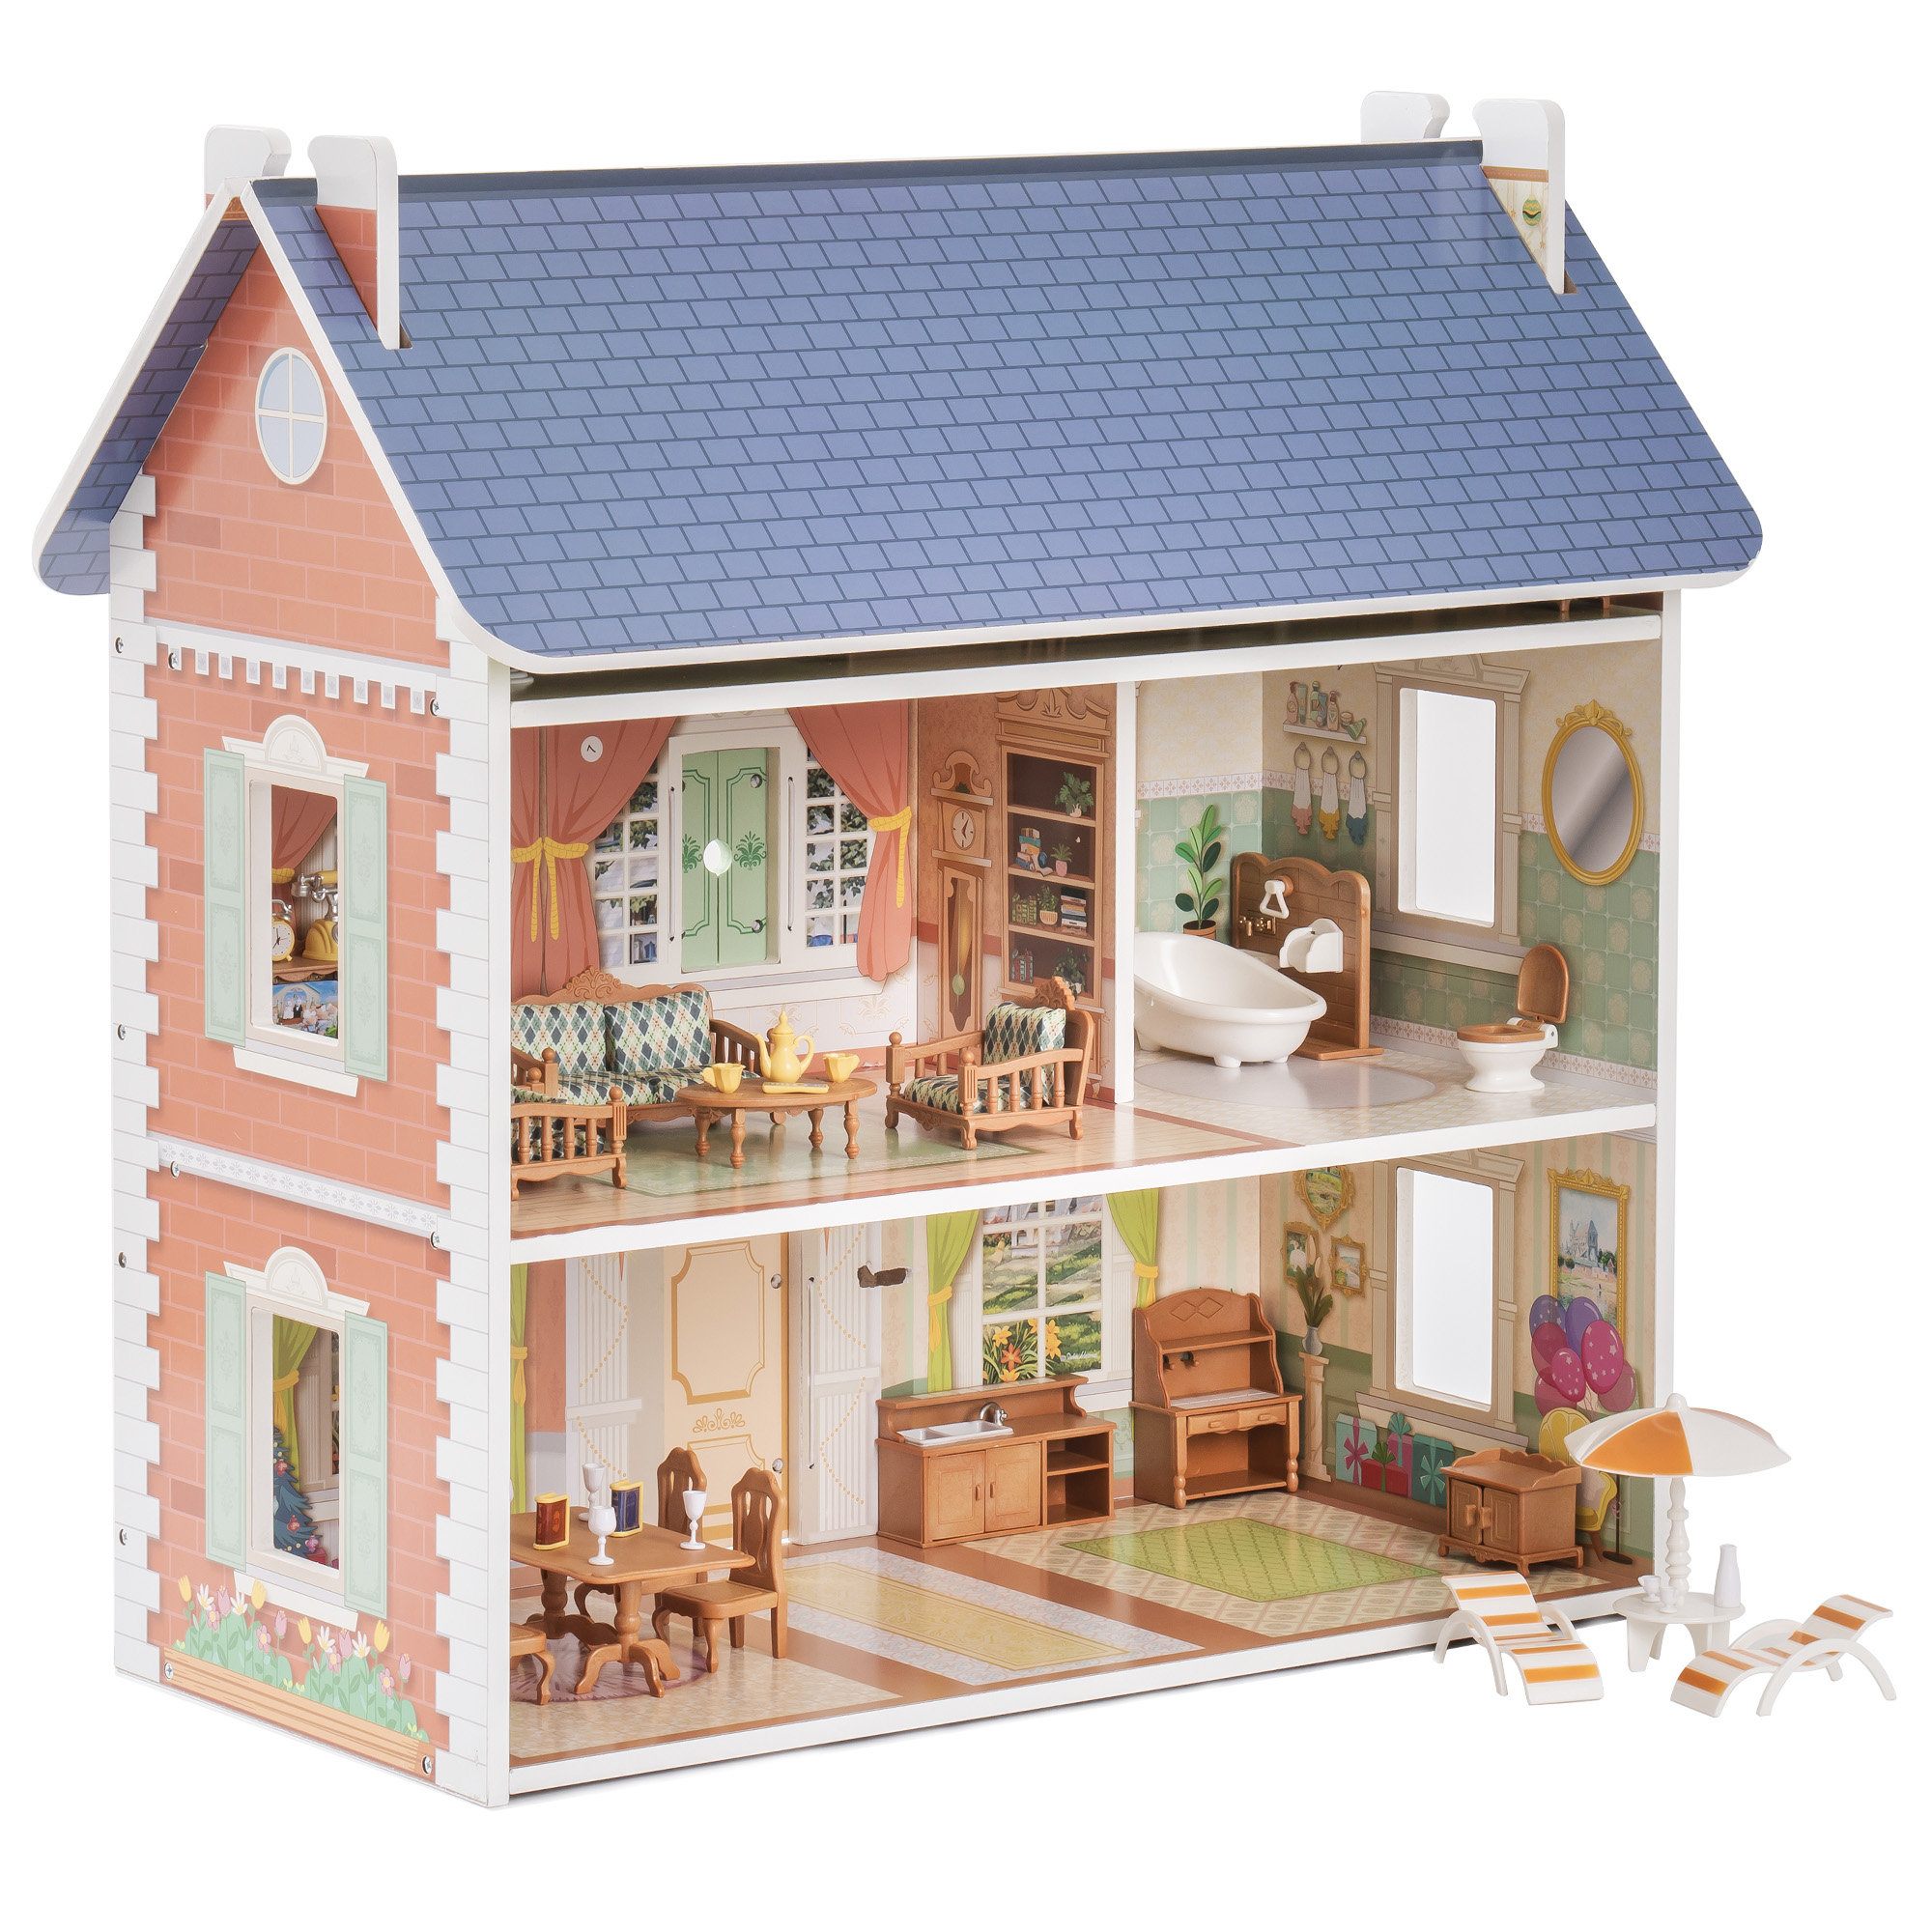 Barbie Vacation House 42 Dollhouse Playset w/ 2 Levels, 6 Rooms *READ*